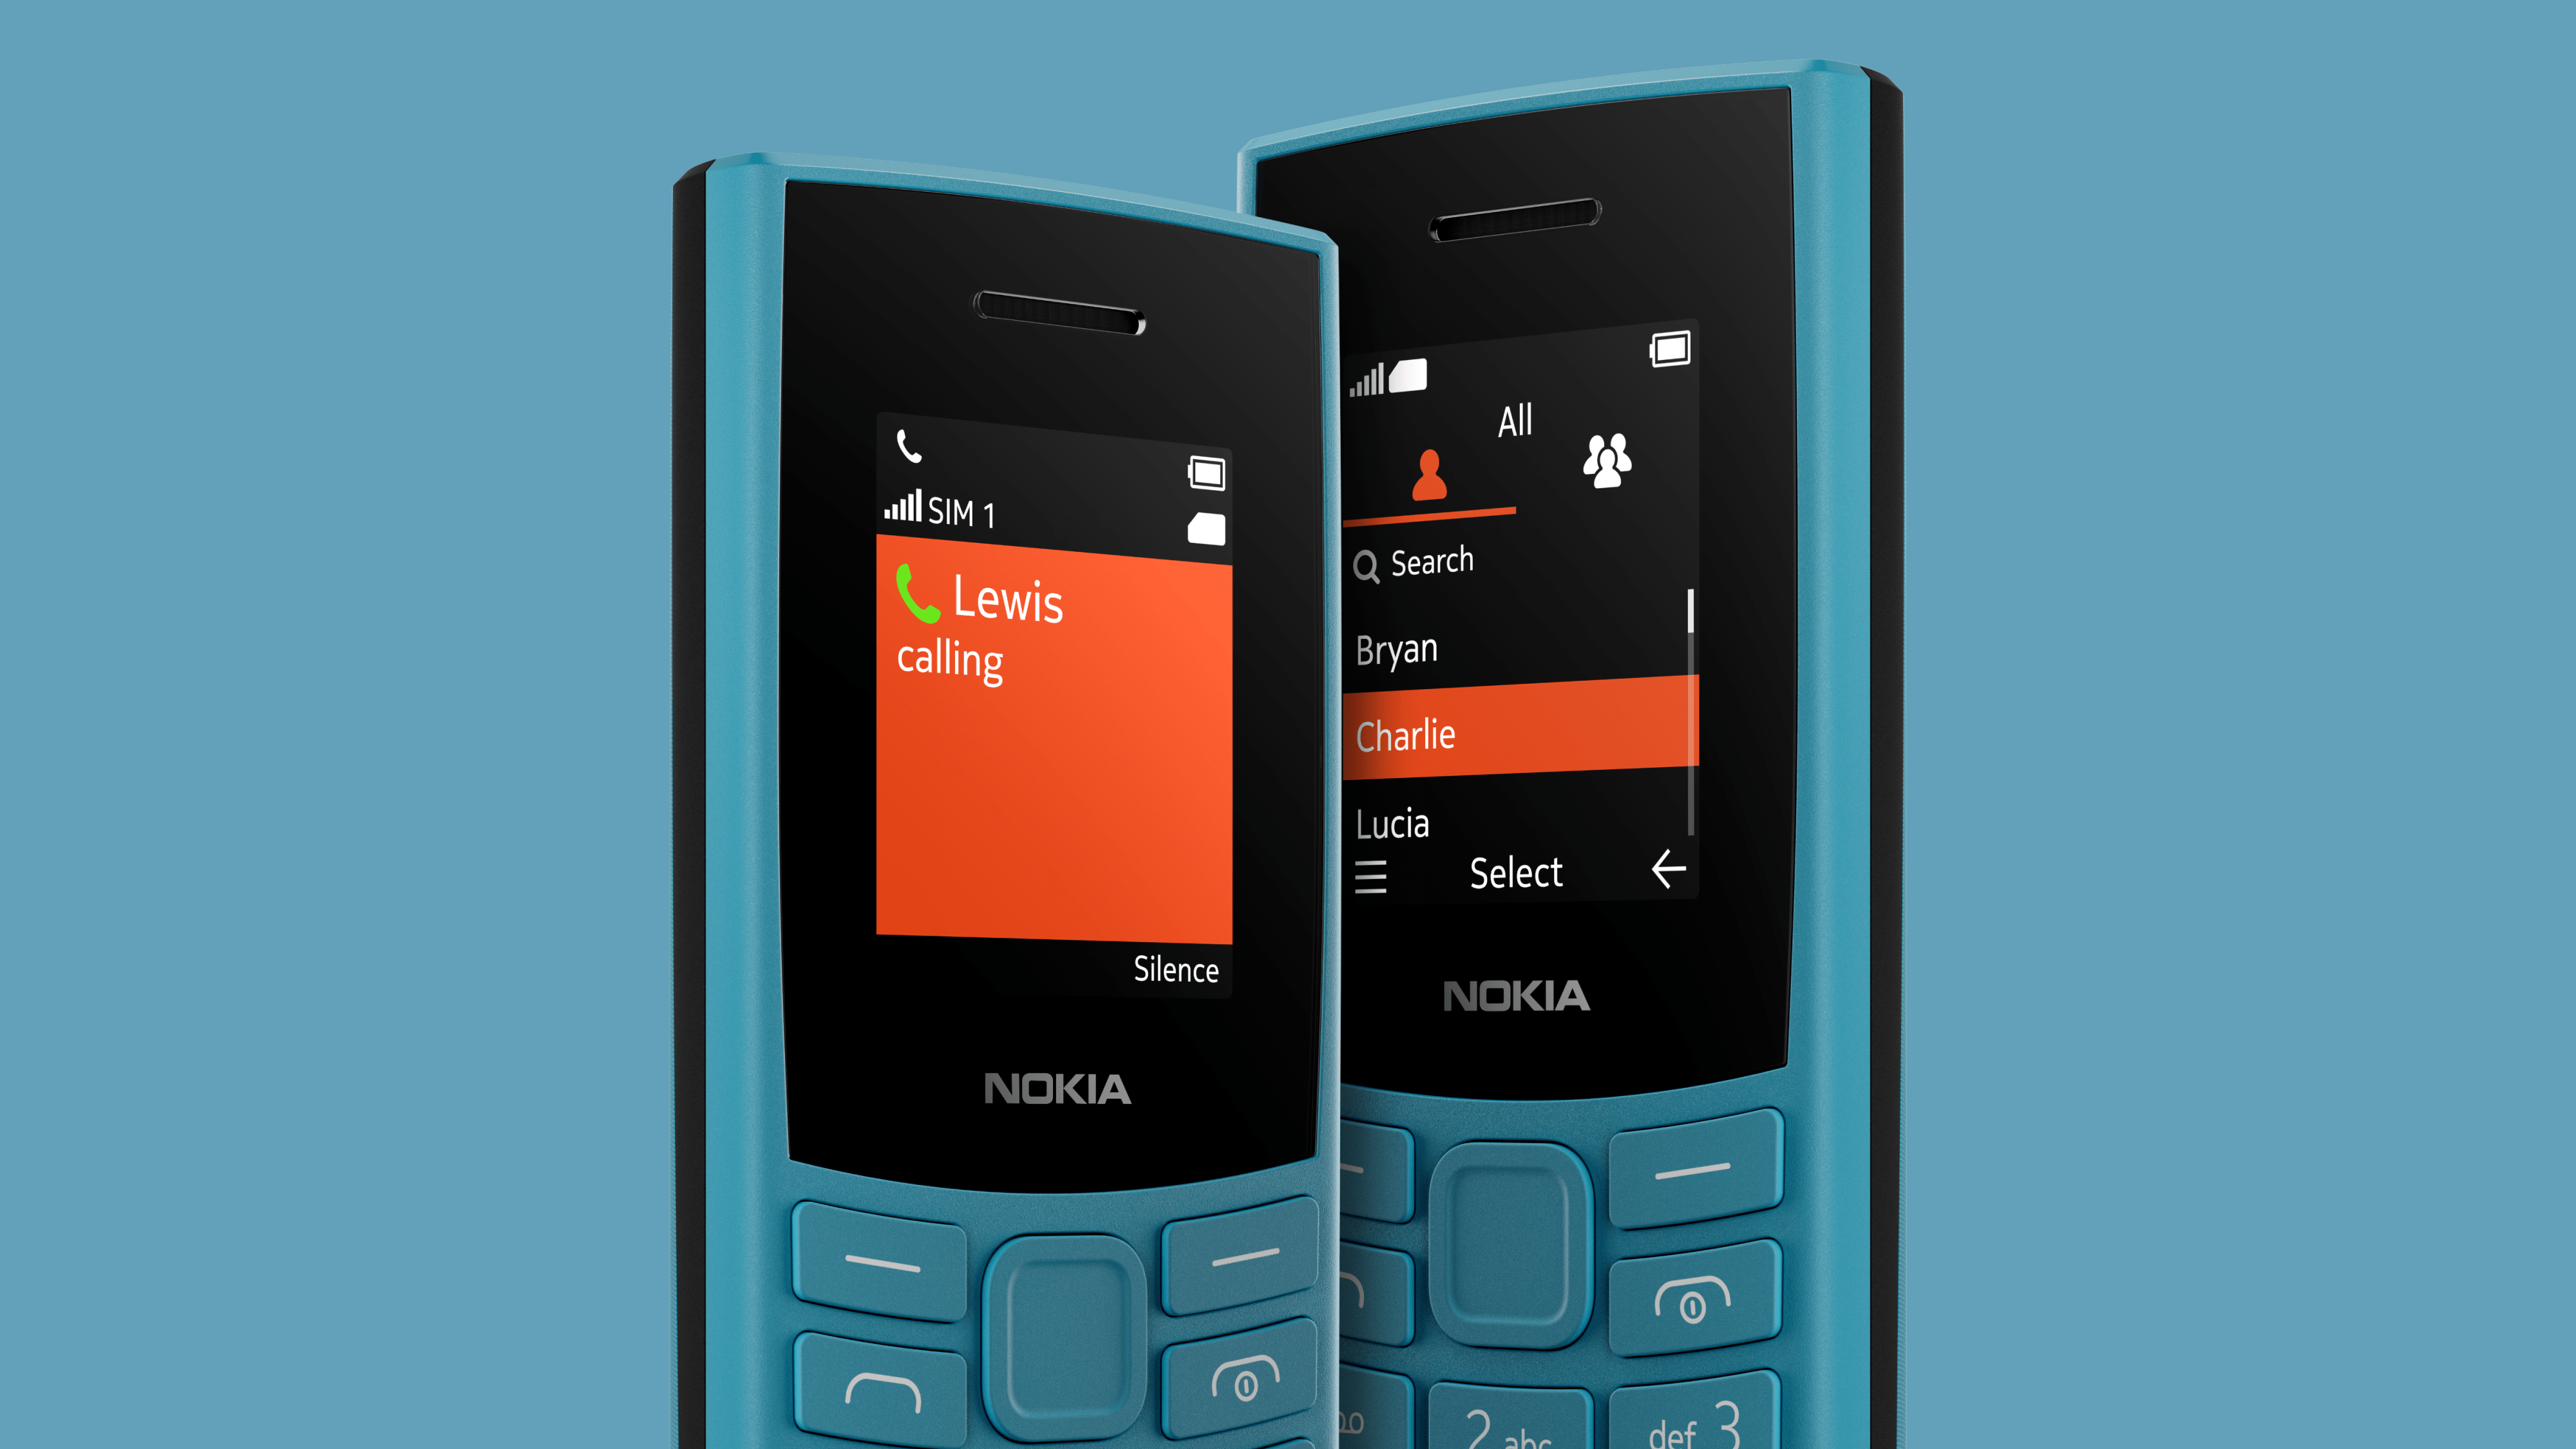 Nokia 105 4G with phone internet feature